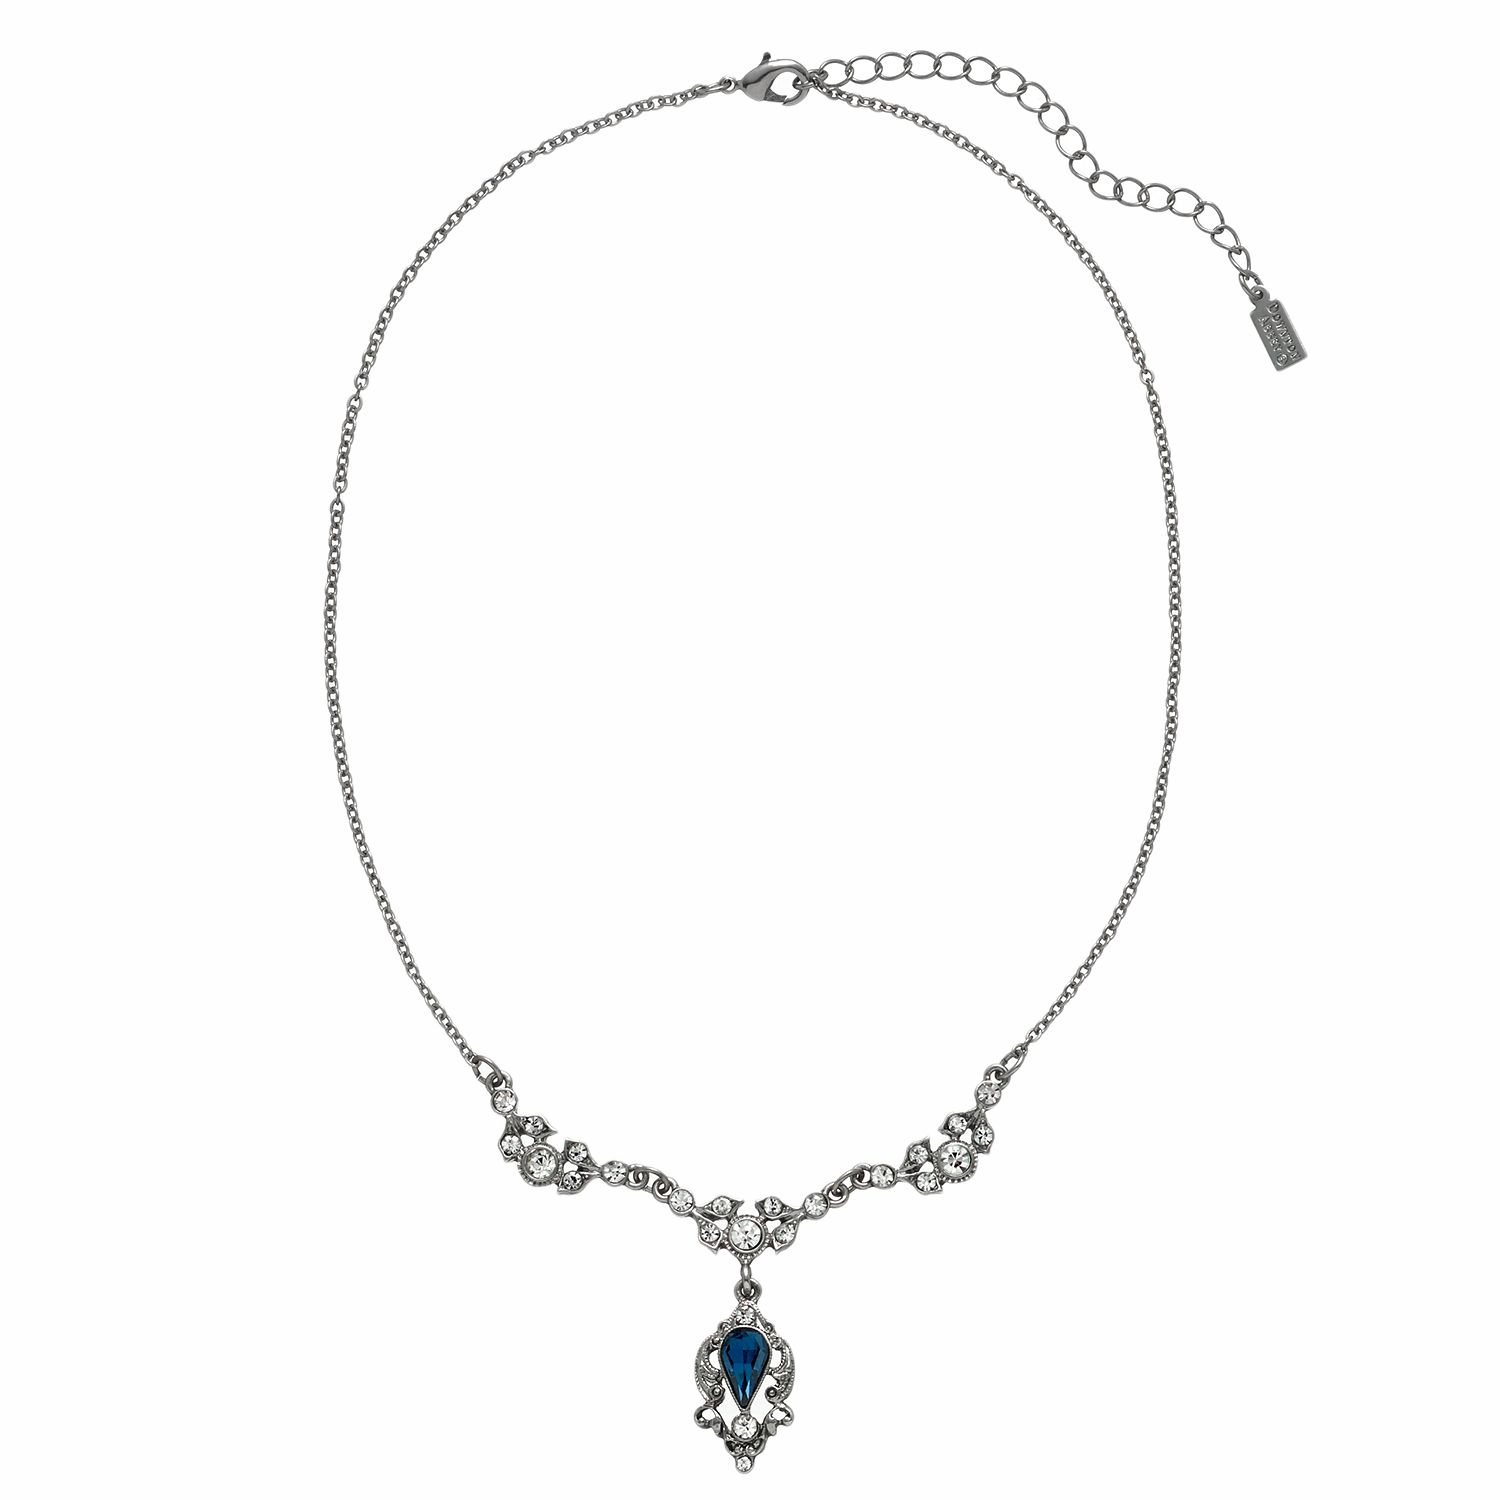 Image for Downton Abbey Silver Tone Simulated Crystal Y Necklace at Kohl's.